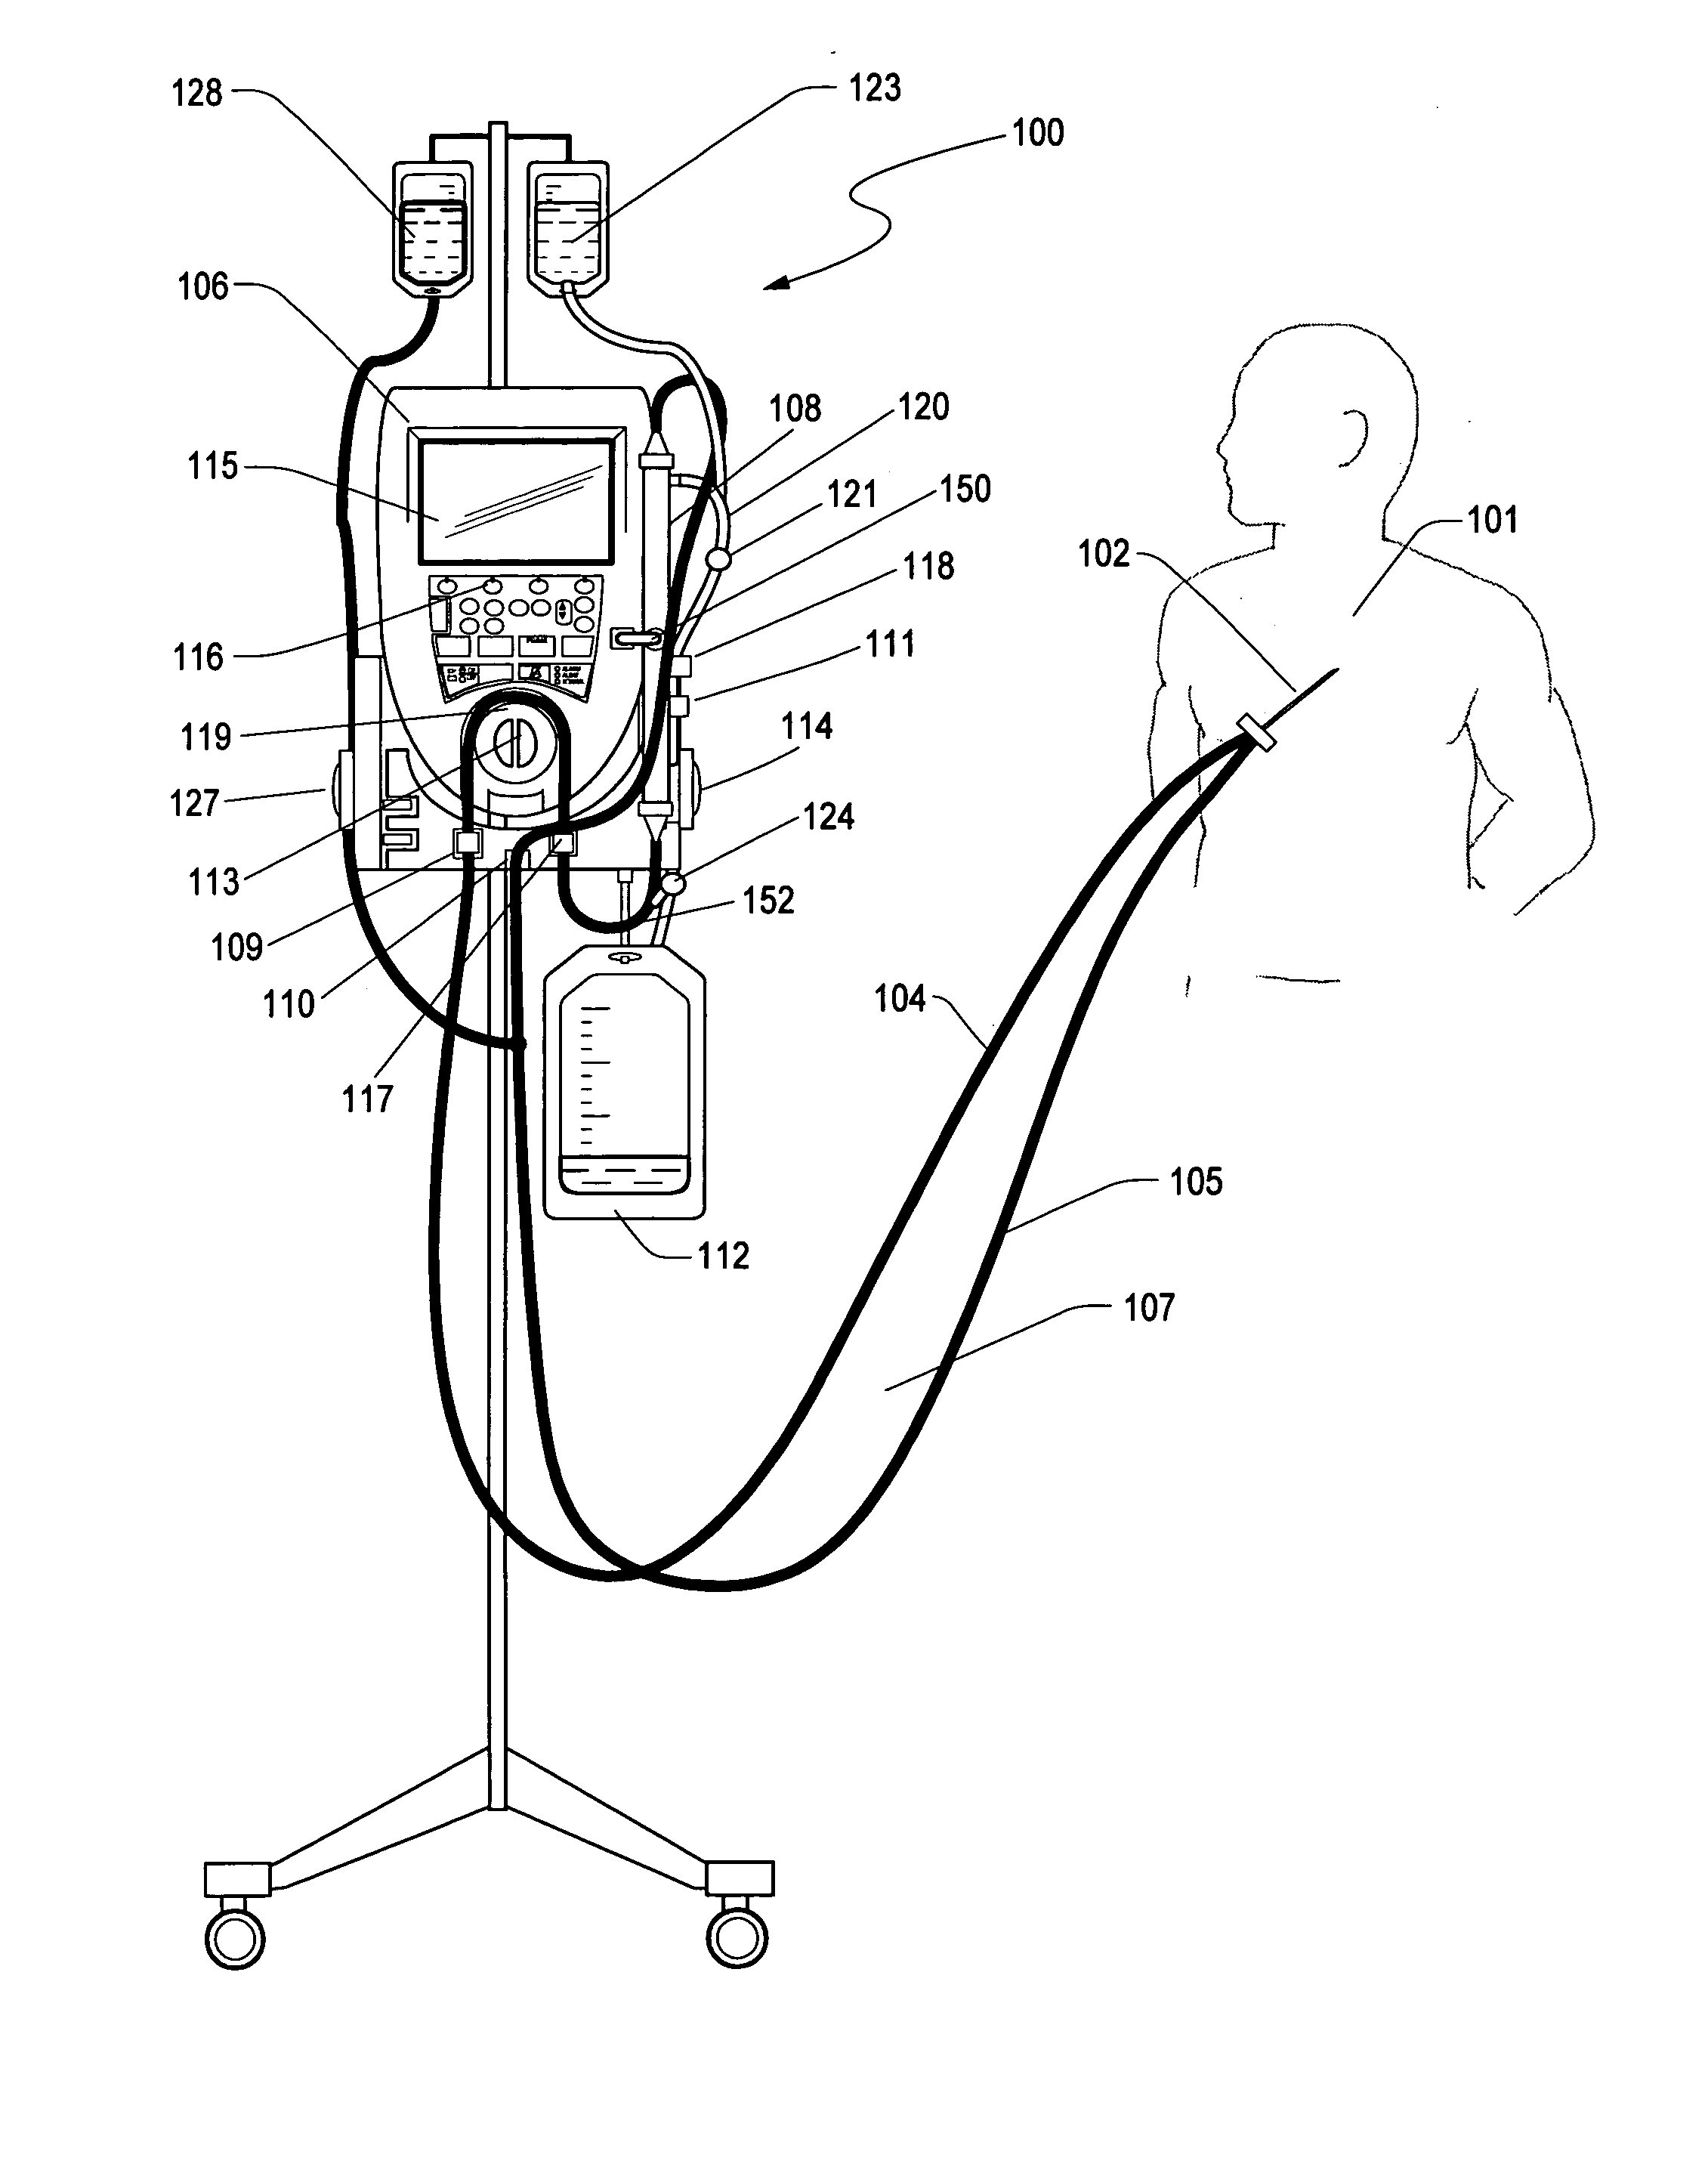 Method and apparatus for an extracorporeal control of blood glucose